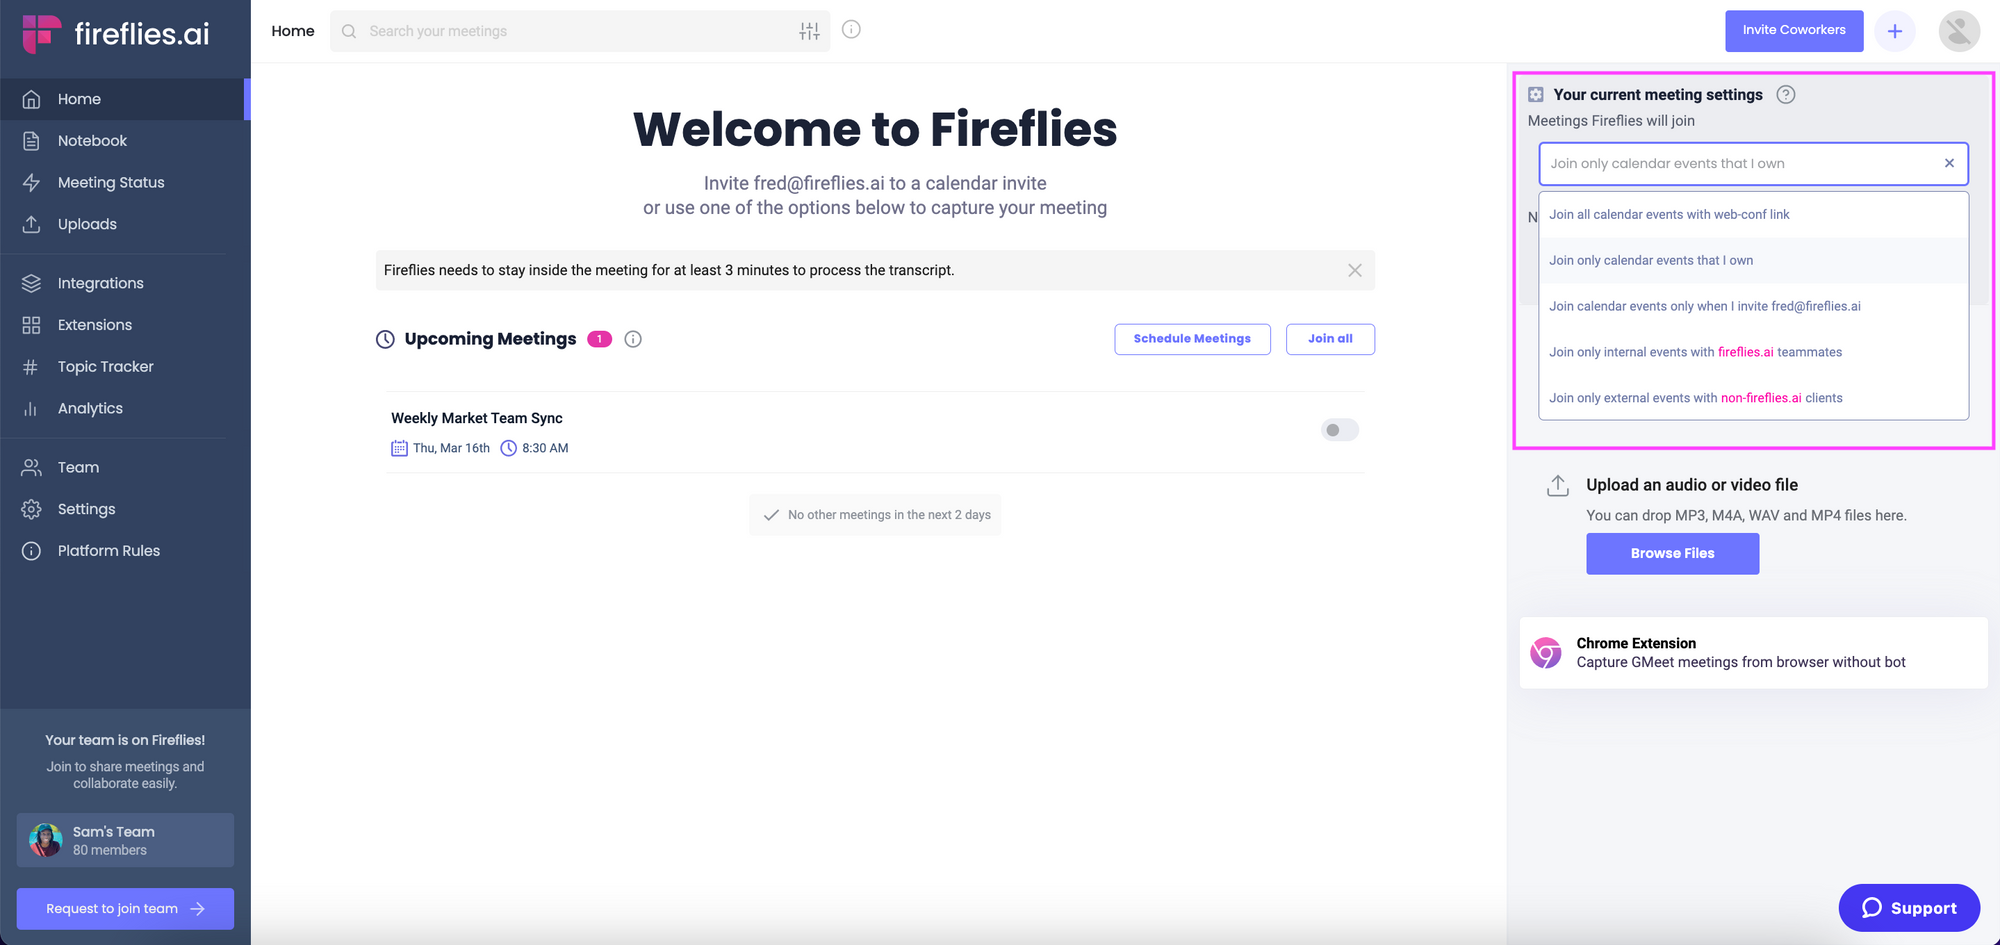 How to use Fireflies to share meeting recaps - Meetings fireflies will join